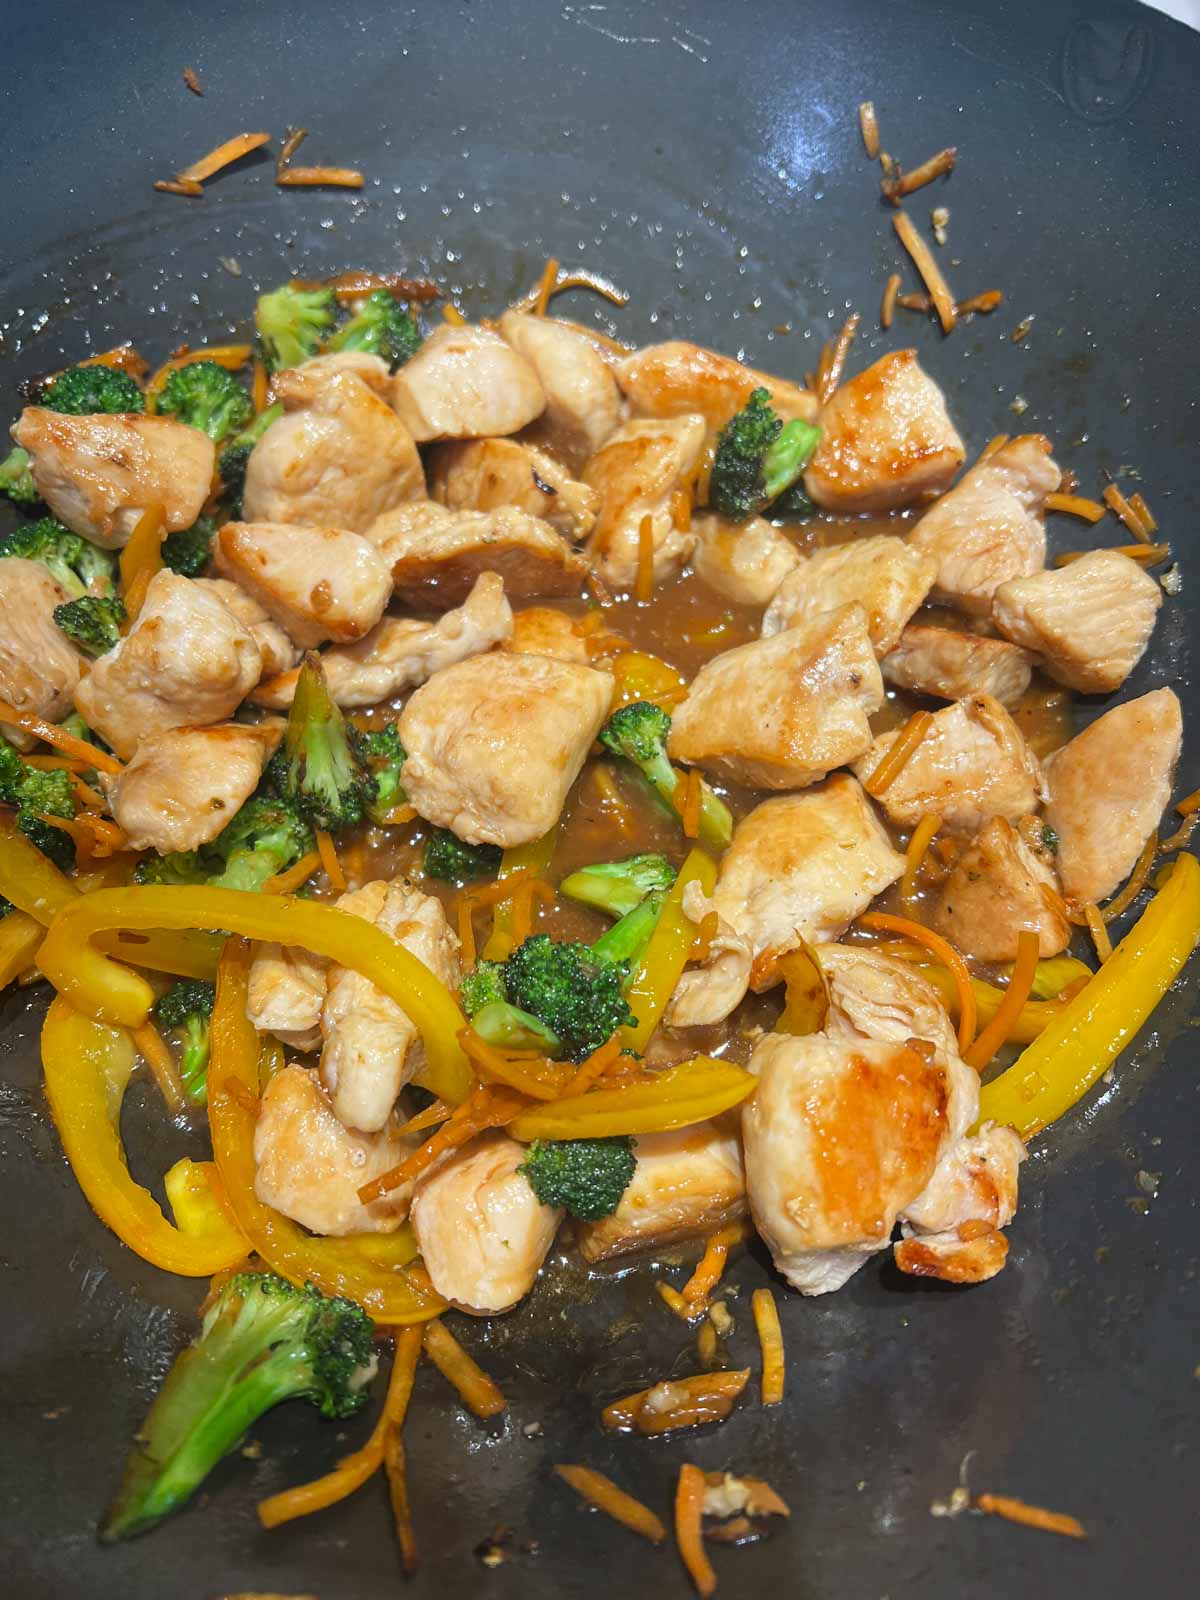 chicken and veggies added to a wok to cook with a homemade teriyaki sauce